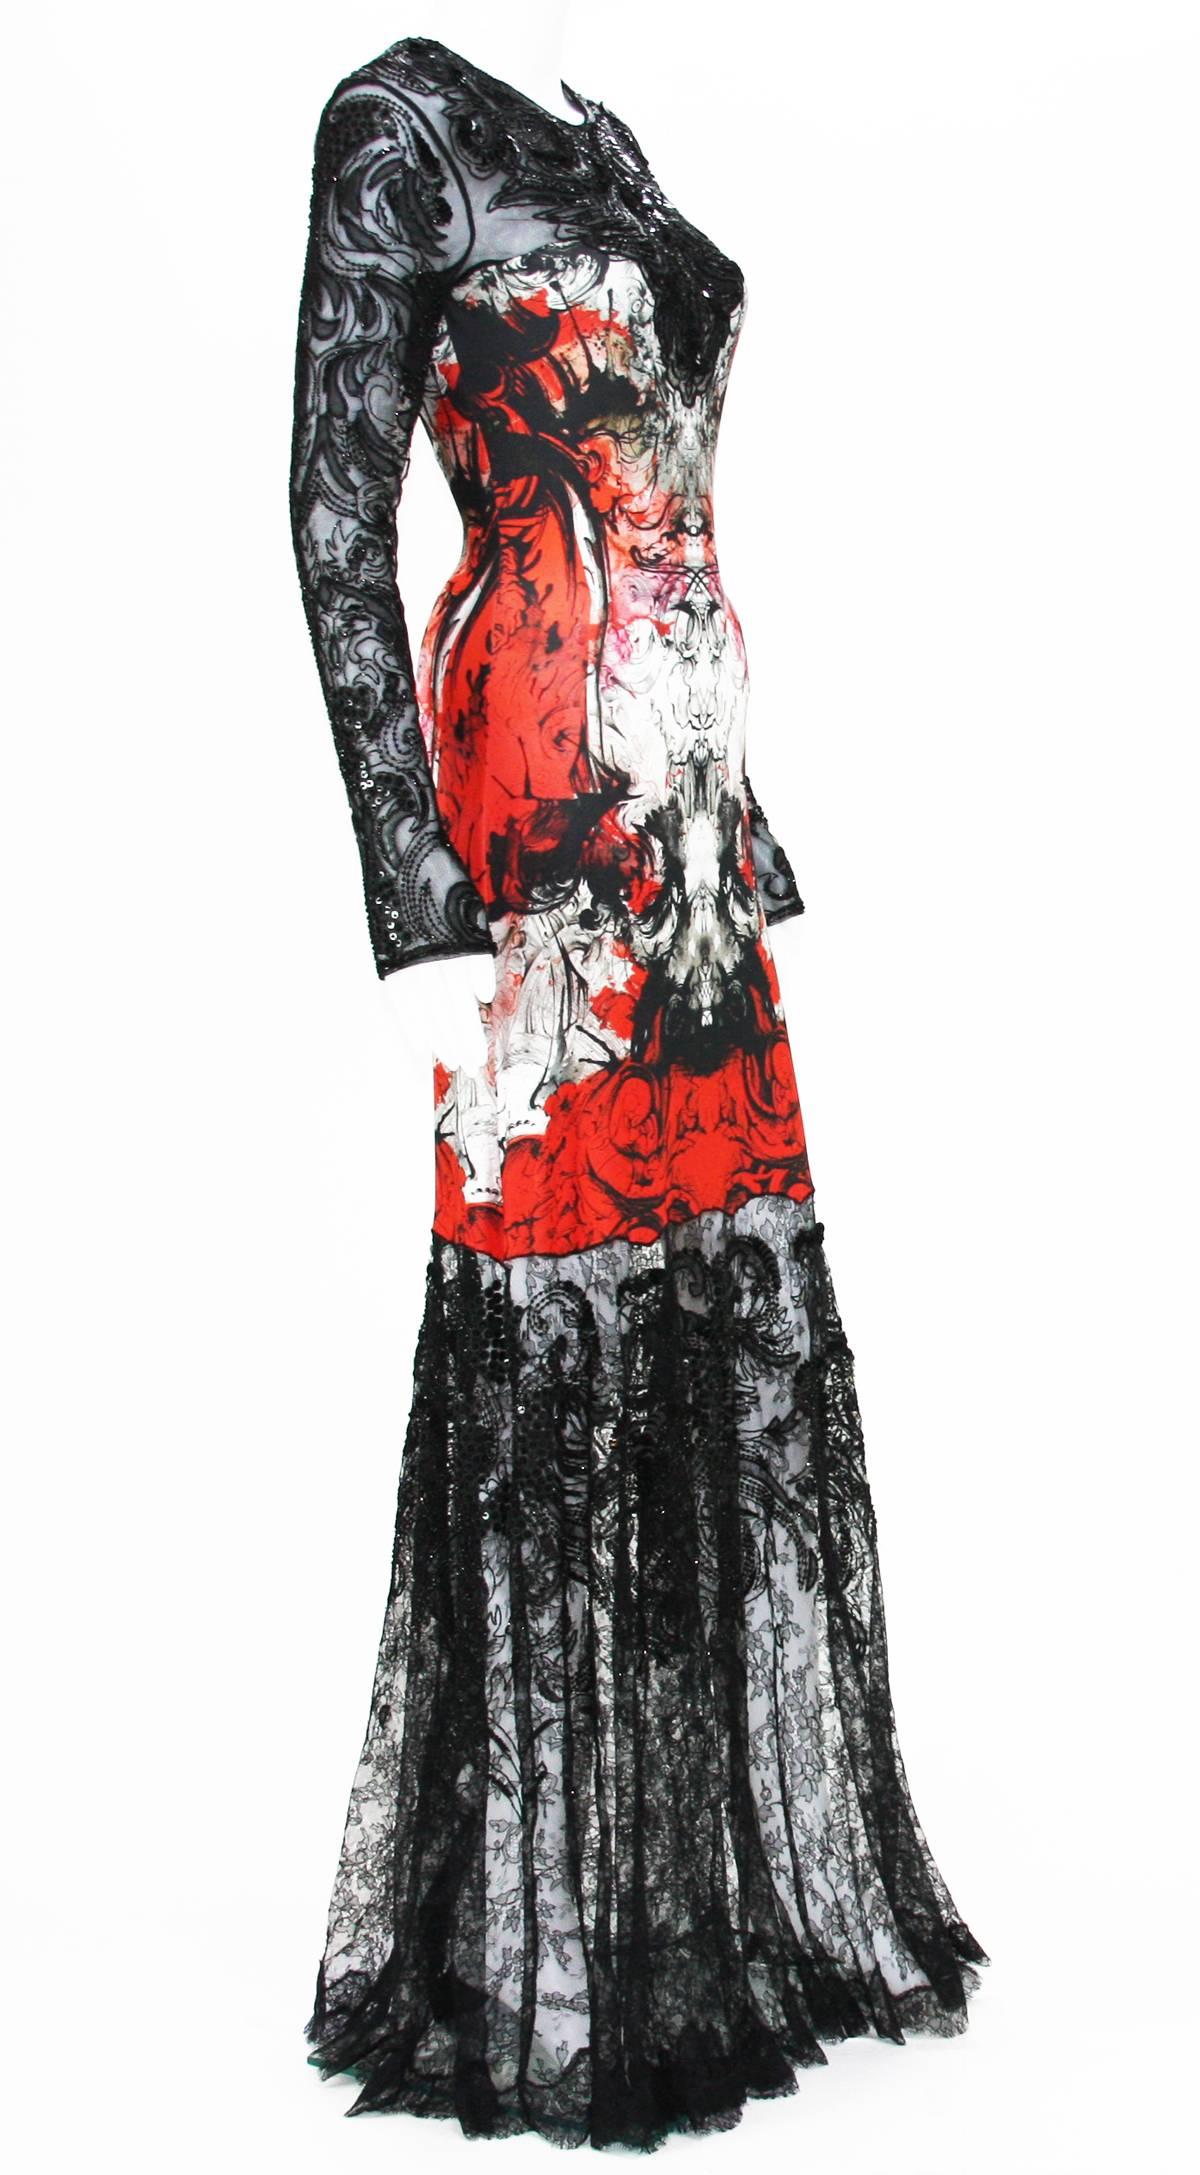 New ROBERTO CAVALLI Lace Embellished Long Dress Gown
Italian size 42 - US 6
Colors - Black, Red, White
Lace Embellished with Beads, Sequins, Leather
Printed Stretch Fabric - 92% Rayon, 8% Elastane
Back Zip Closure
Made in Italy
New without tag.
